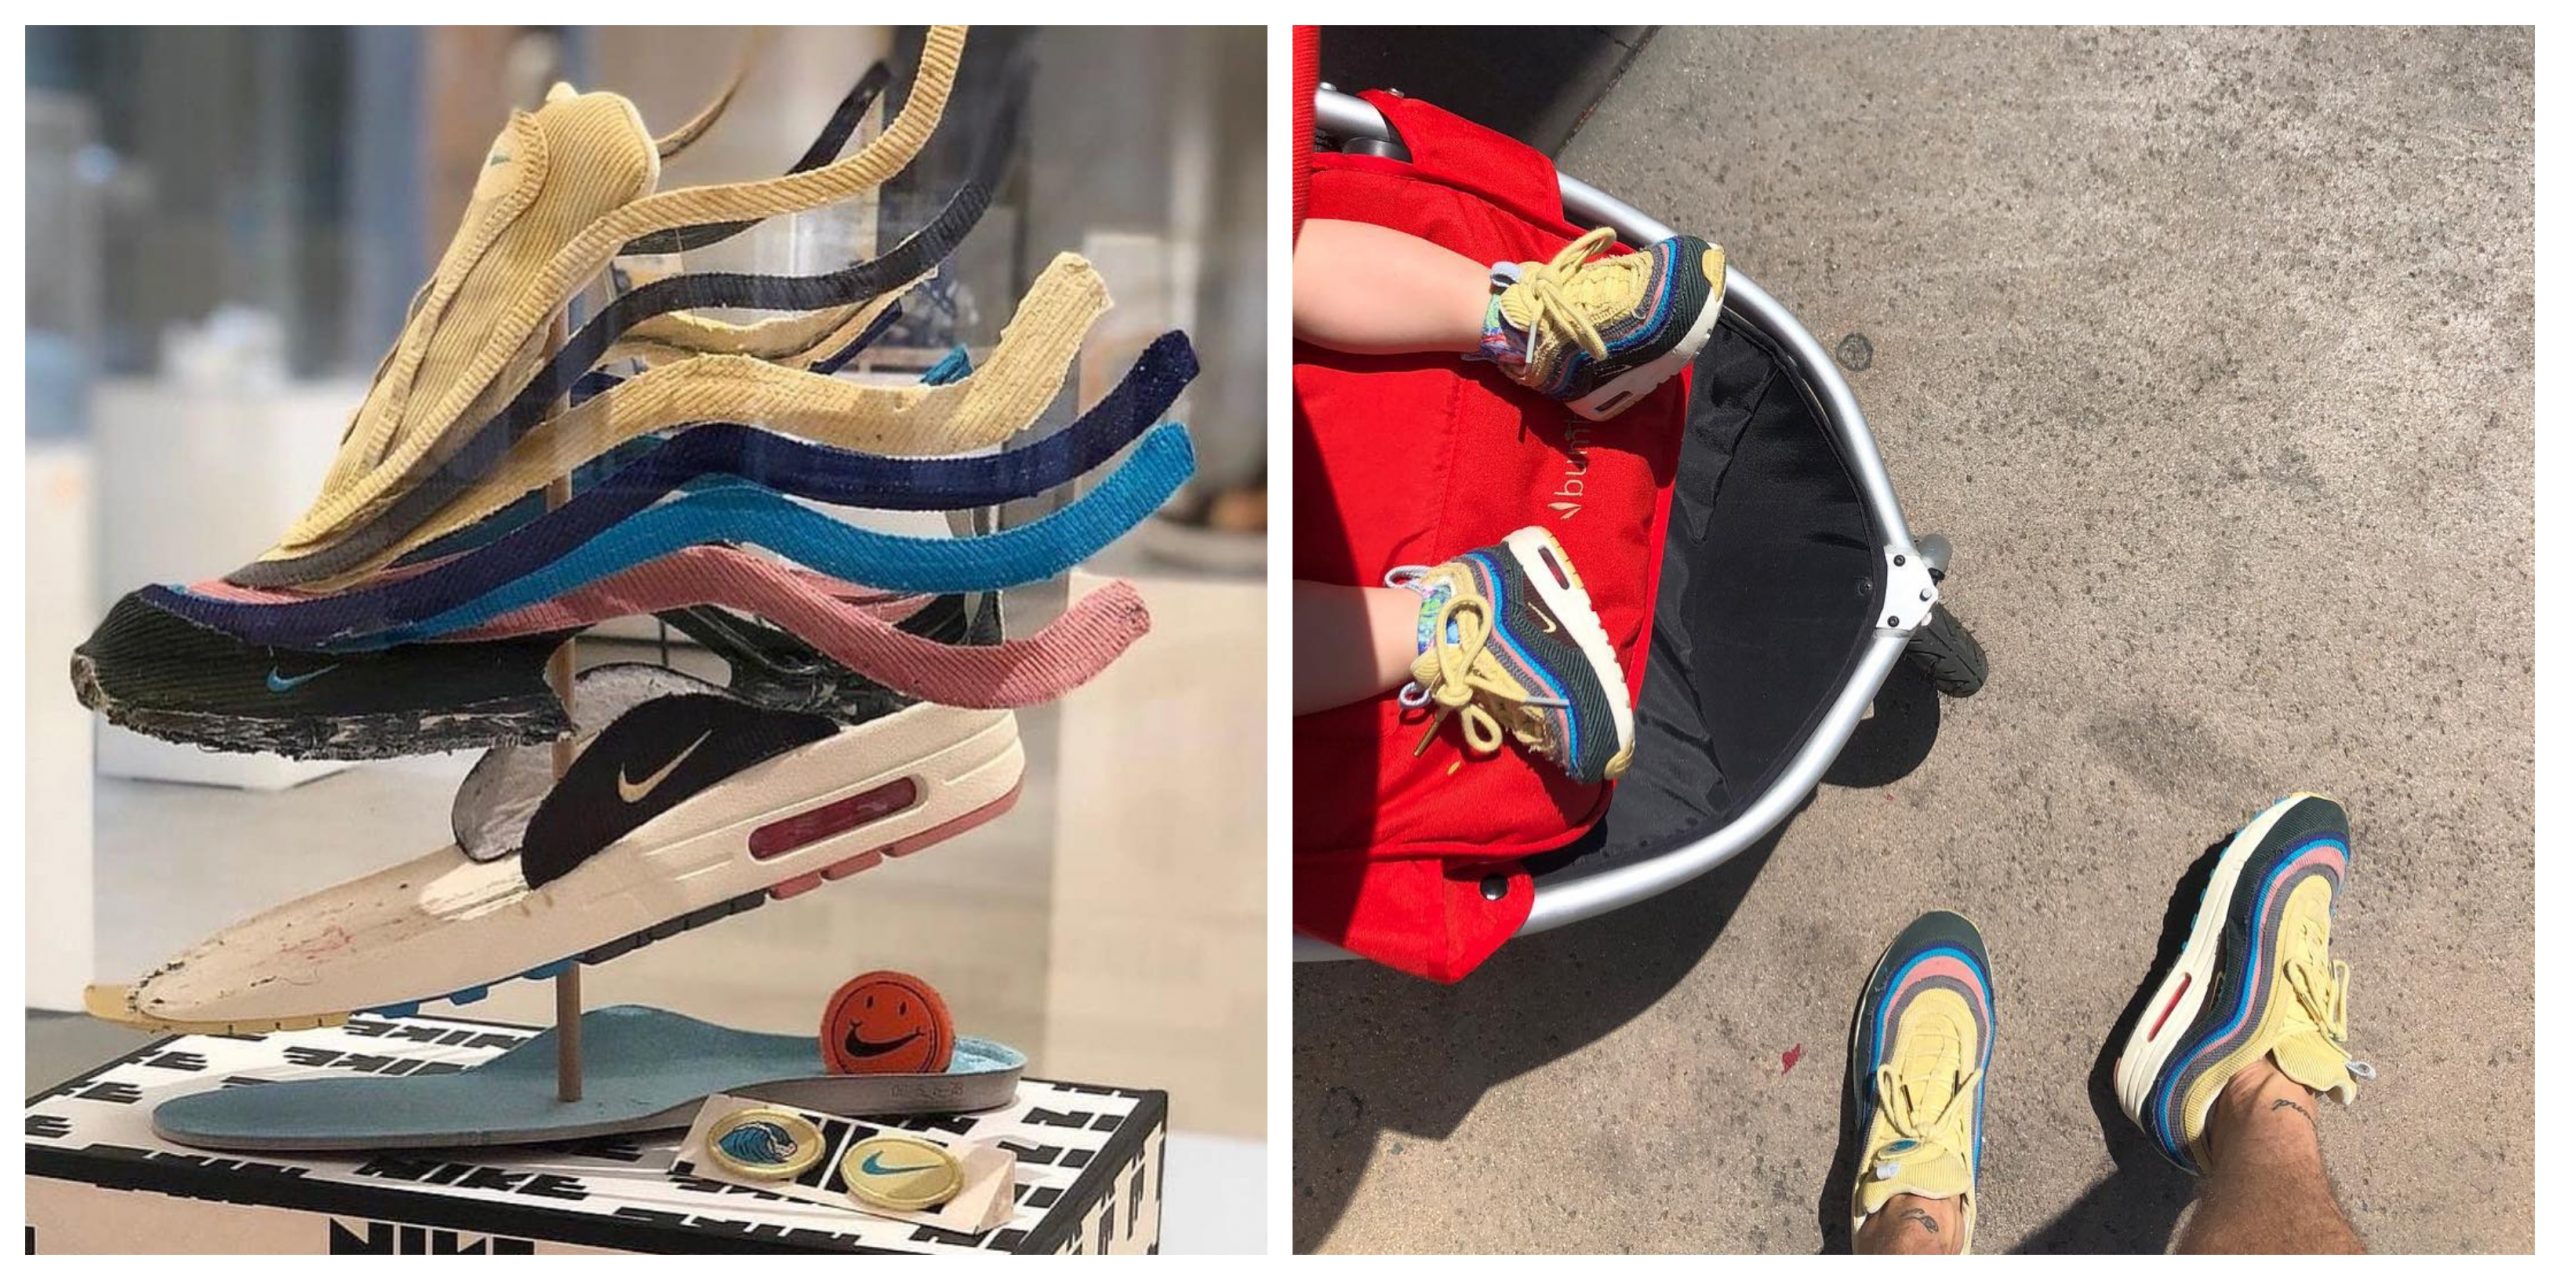 HOT!  Sean Wotherspoon & Nike NO MORE Nike Air Max 1/97 SW - Expected resell increase